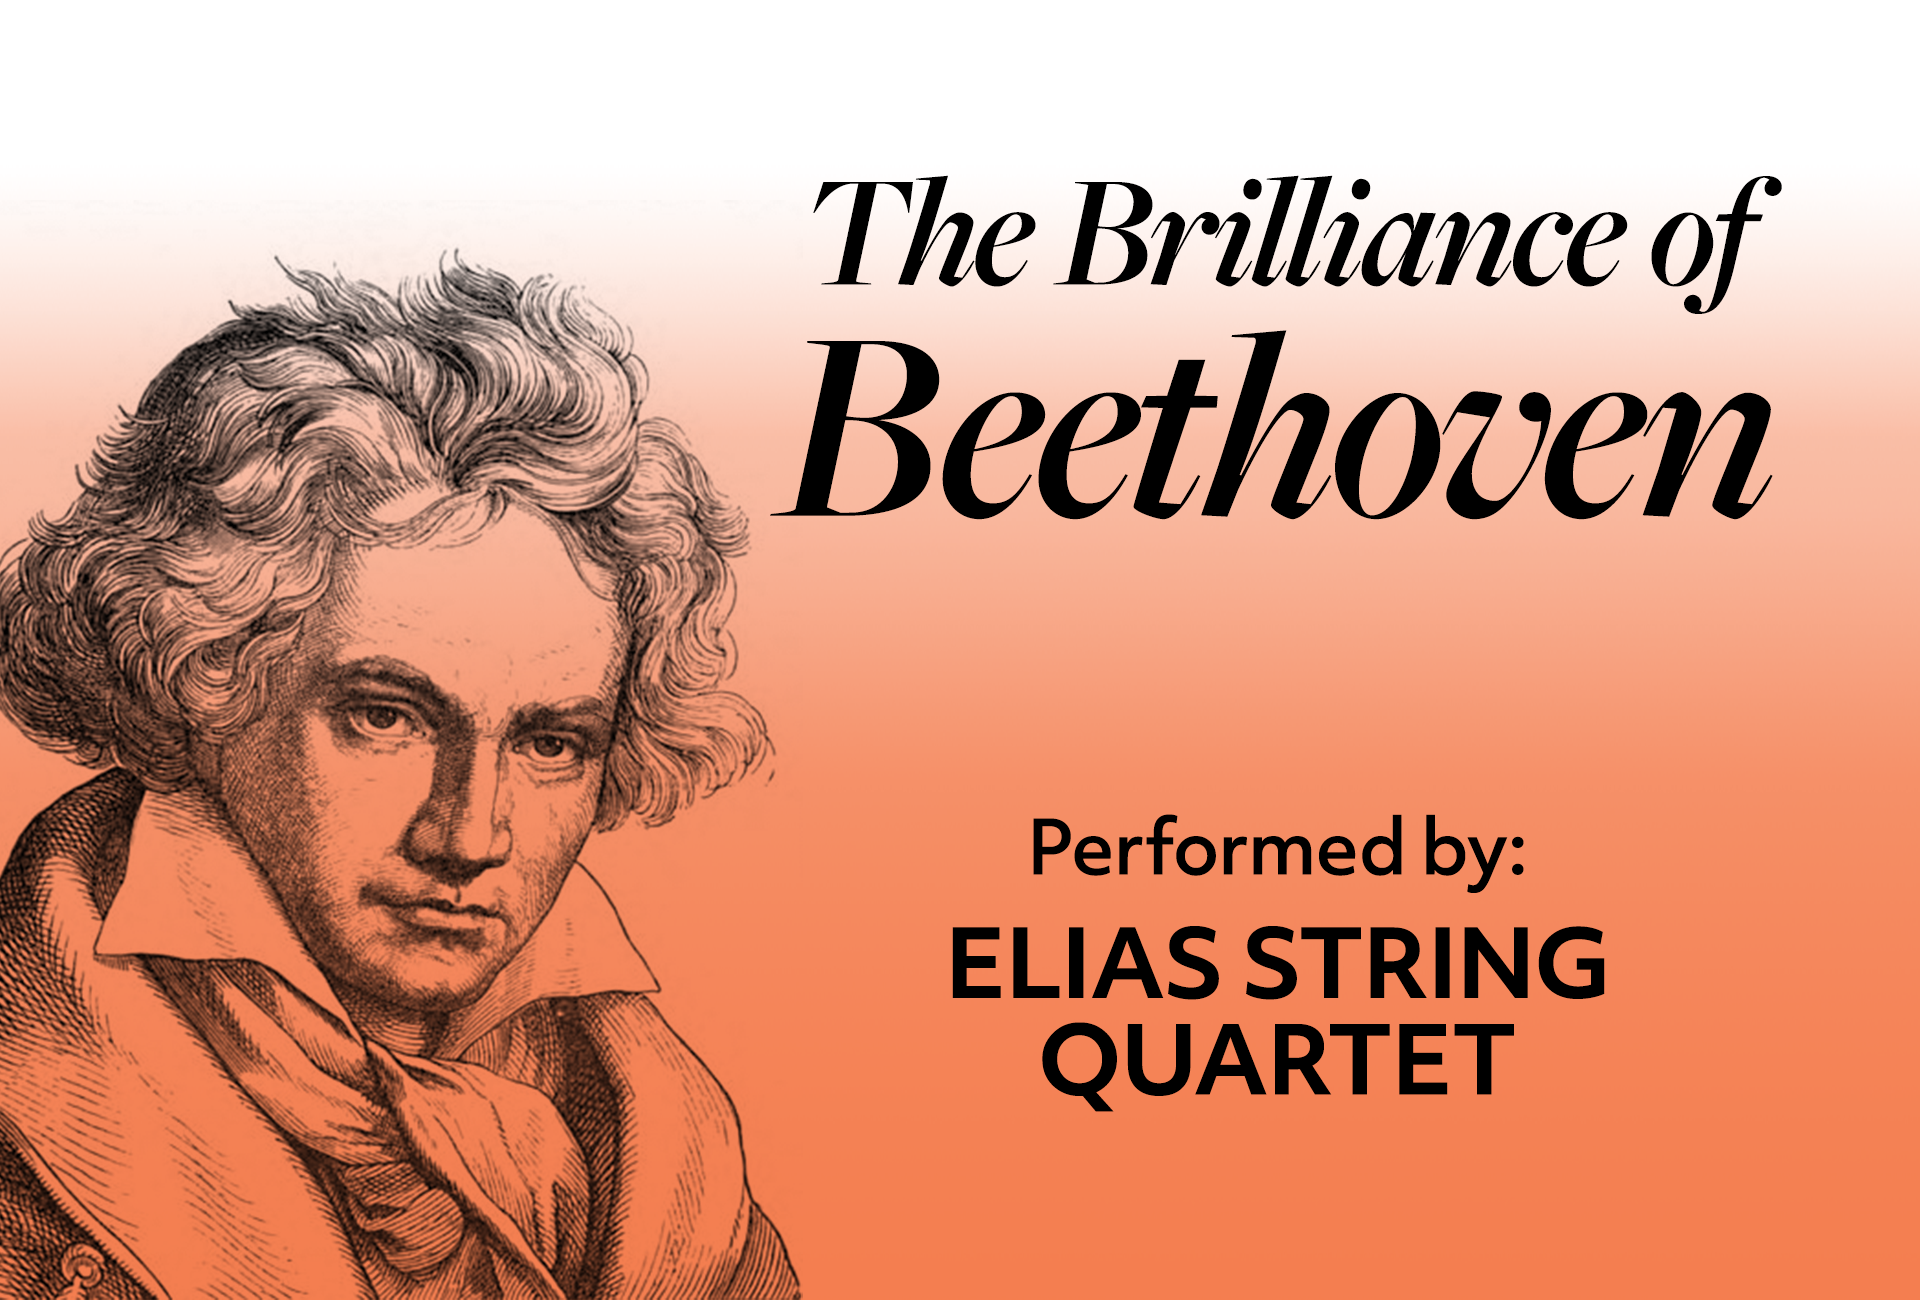 The Brilliance of Beethoven Performed by Elias String Quartet